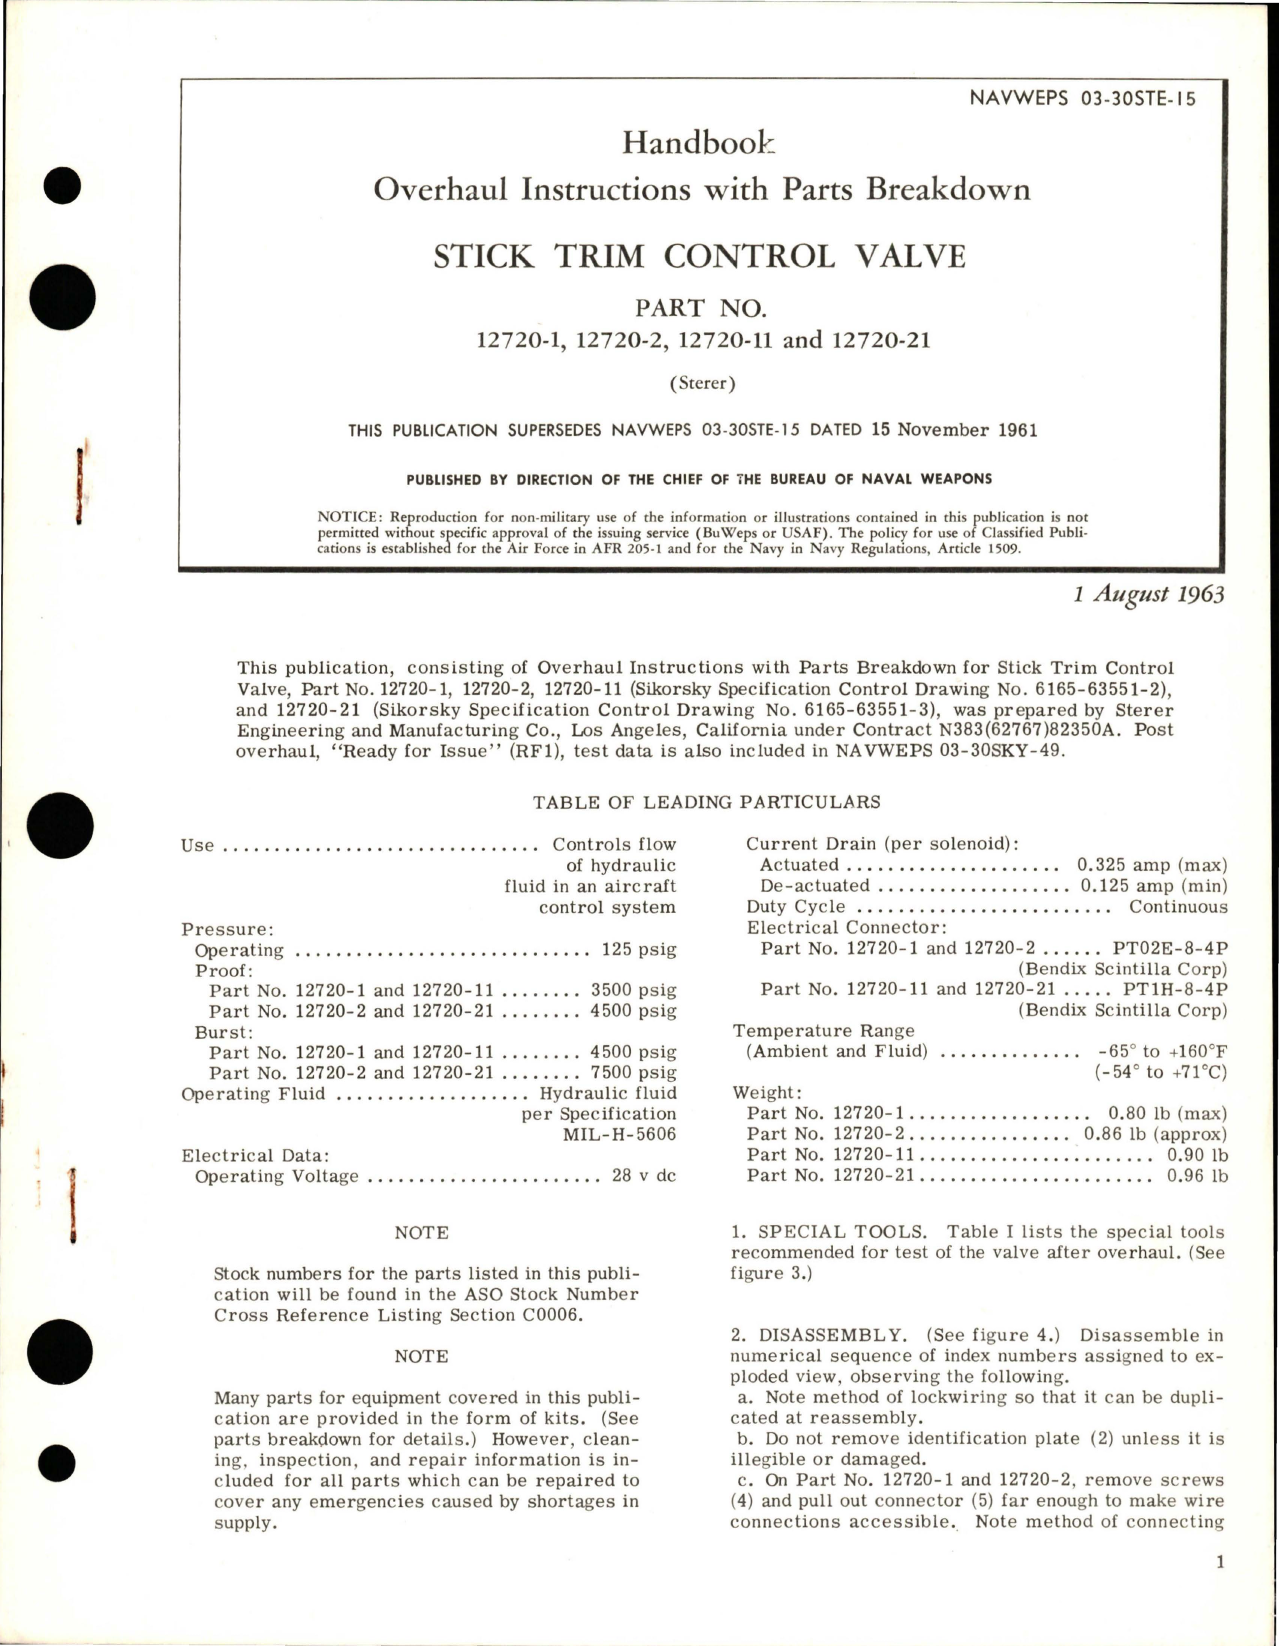 Sample page 1 from AirCorps Library document: Overhaul Instructions with Parts Breakdown for Stick Trim Control Valve - Part 12720-1, 12720-2, 12720-11, and 12720-21